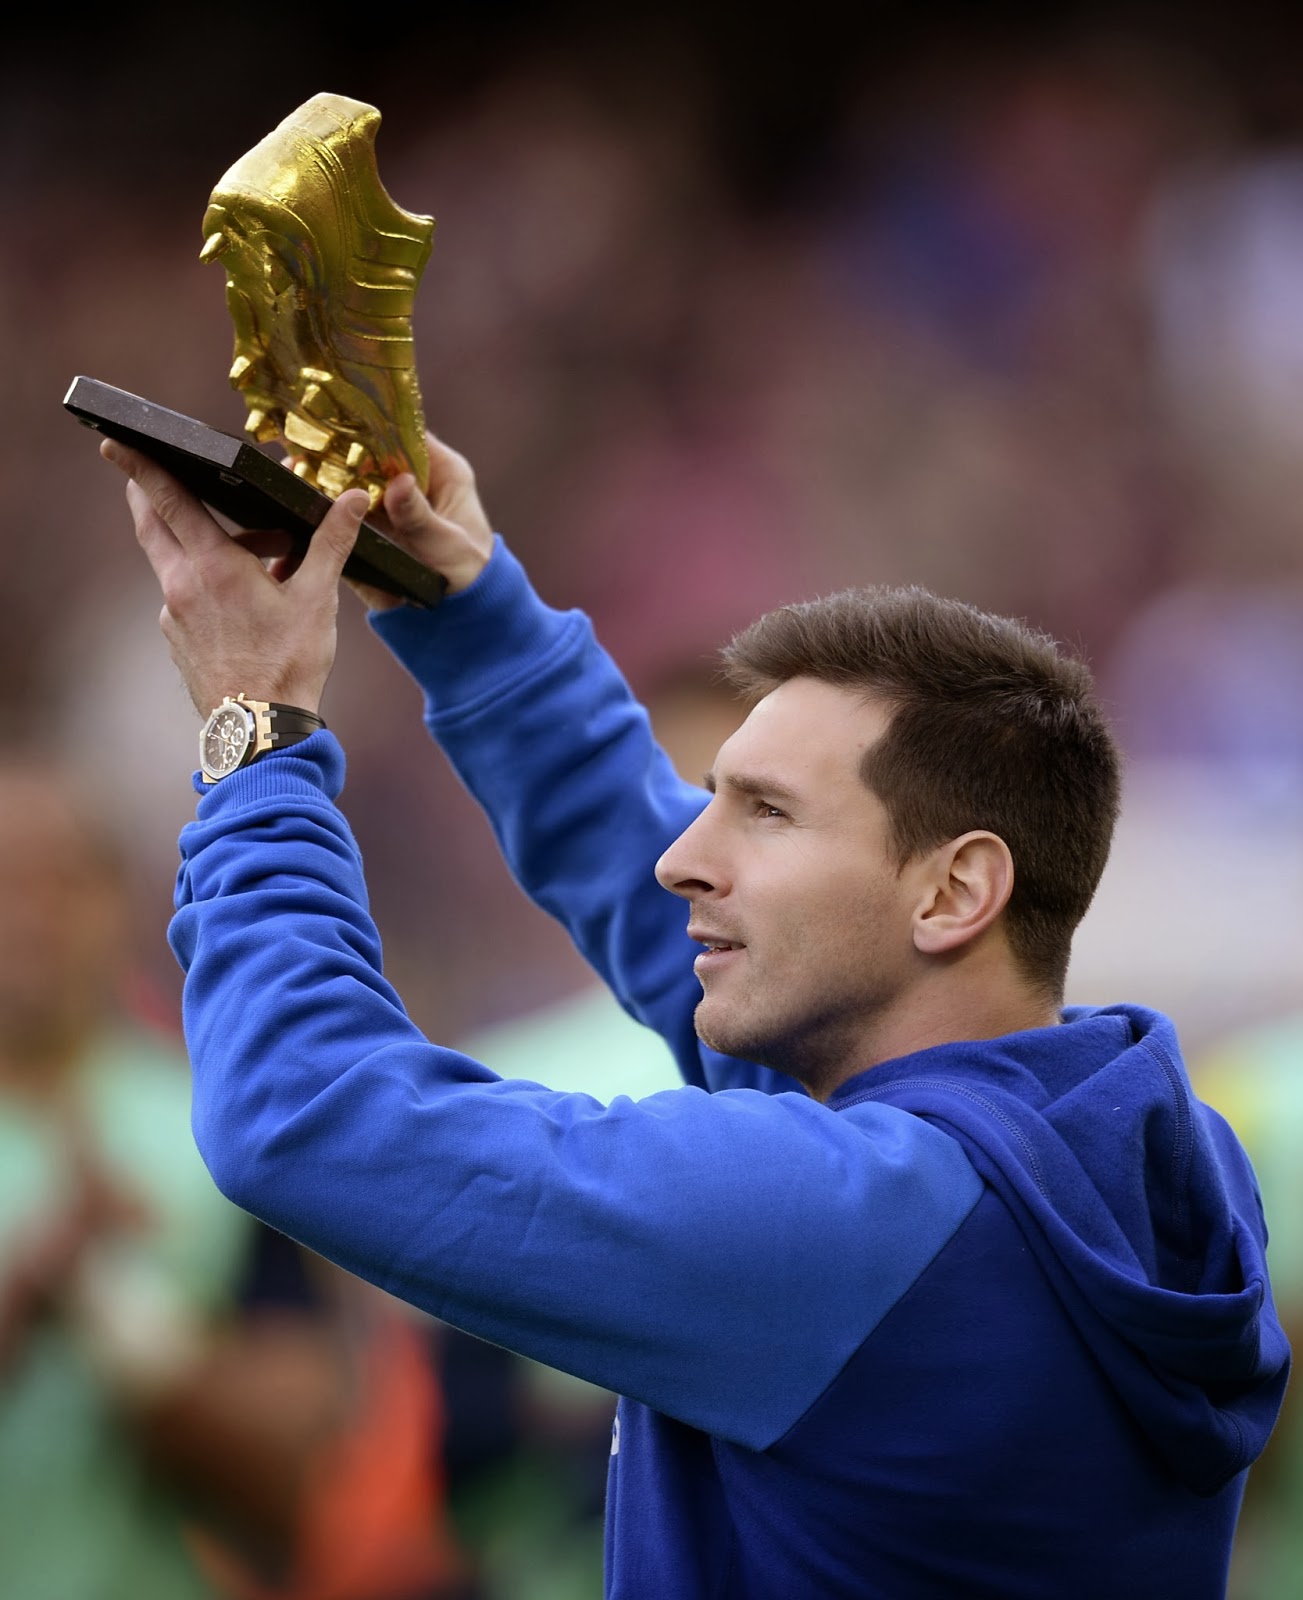 Lionel Messi wins third time Golden Shoe Award - Images Archival Store1303 x 1600